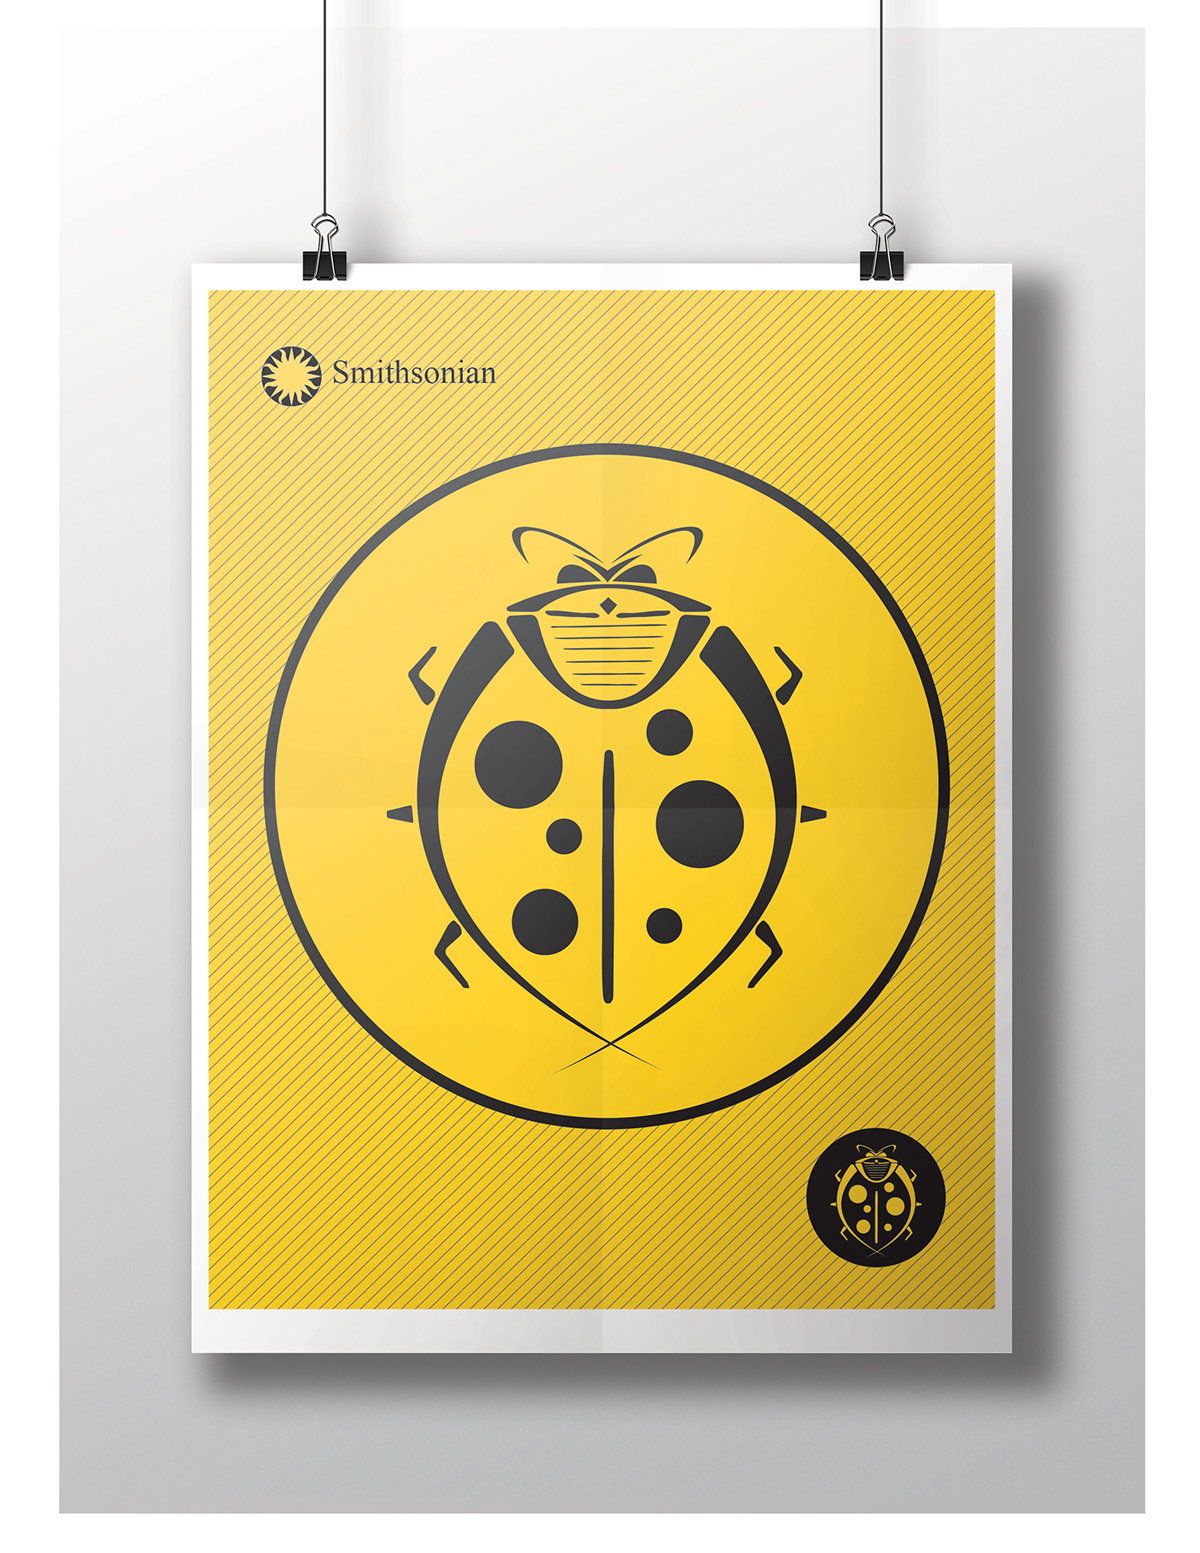 smithsonian entomology Exhibition  Icon design graphic poster Insects ant bee beetle spider butterfly Fly dragonfly